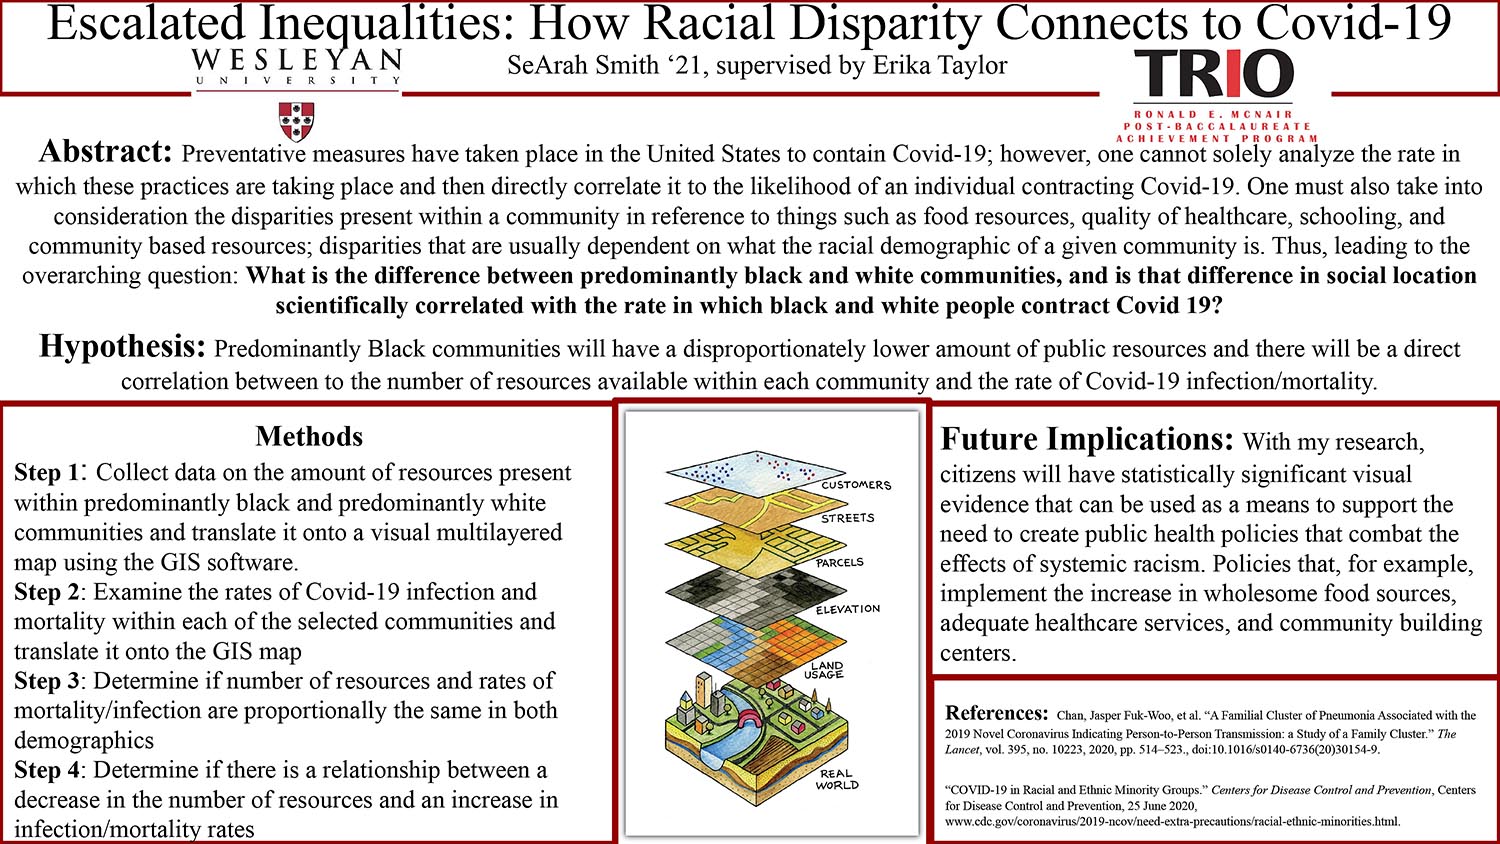 SeArah Smith '21 presented her poster titled "Escalated Inequalities; How Racial Disparity Connects to Covid-19."